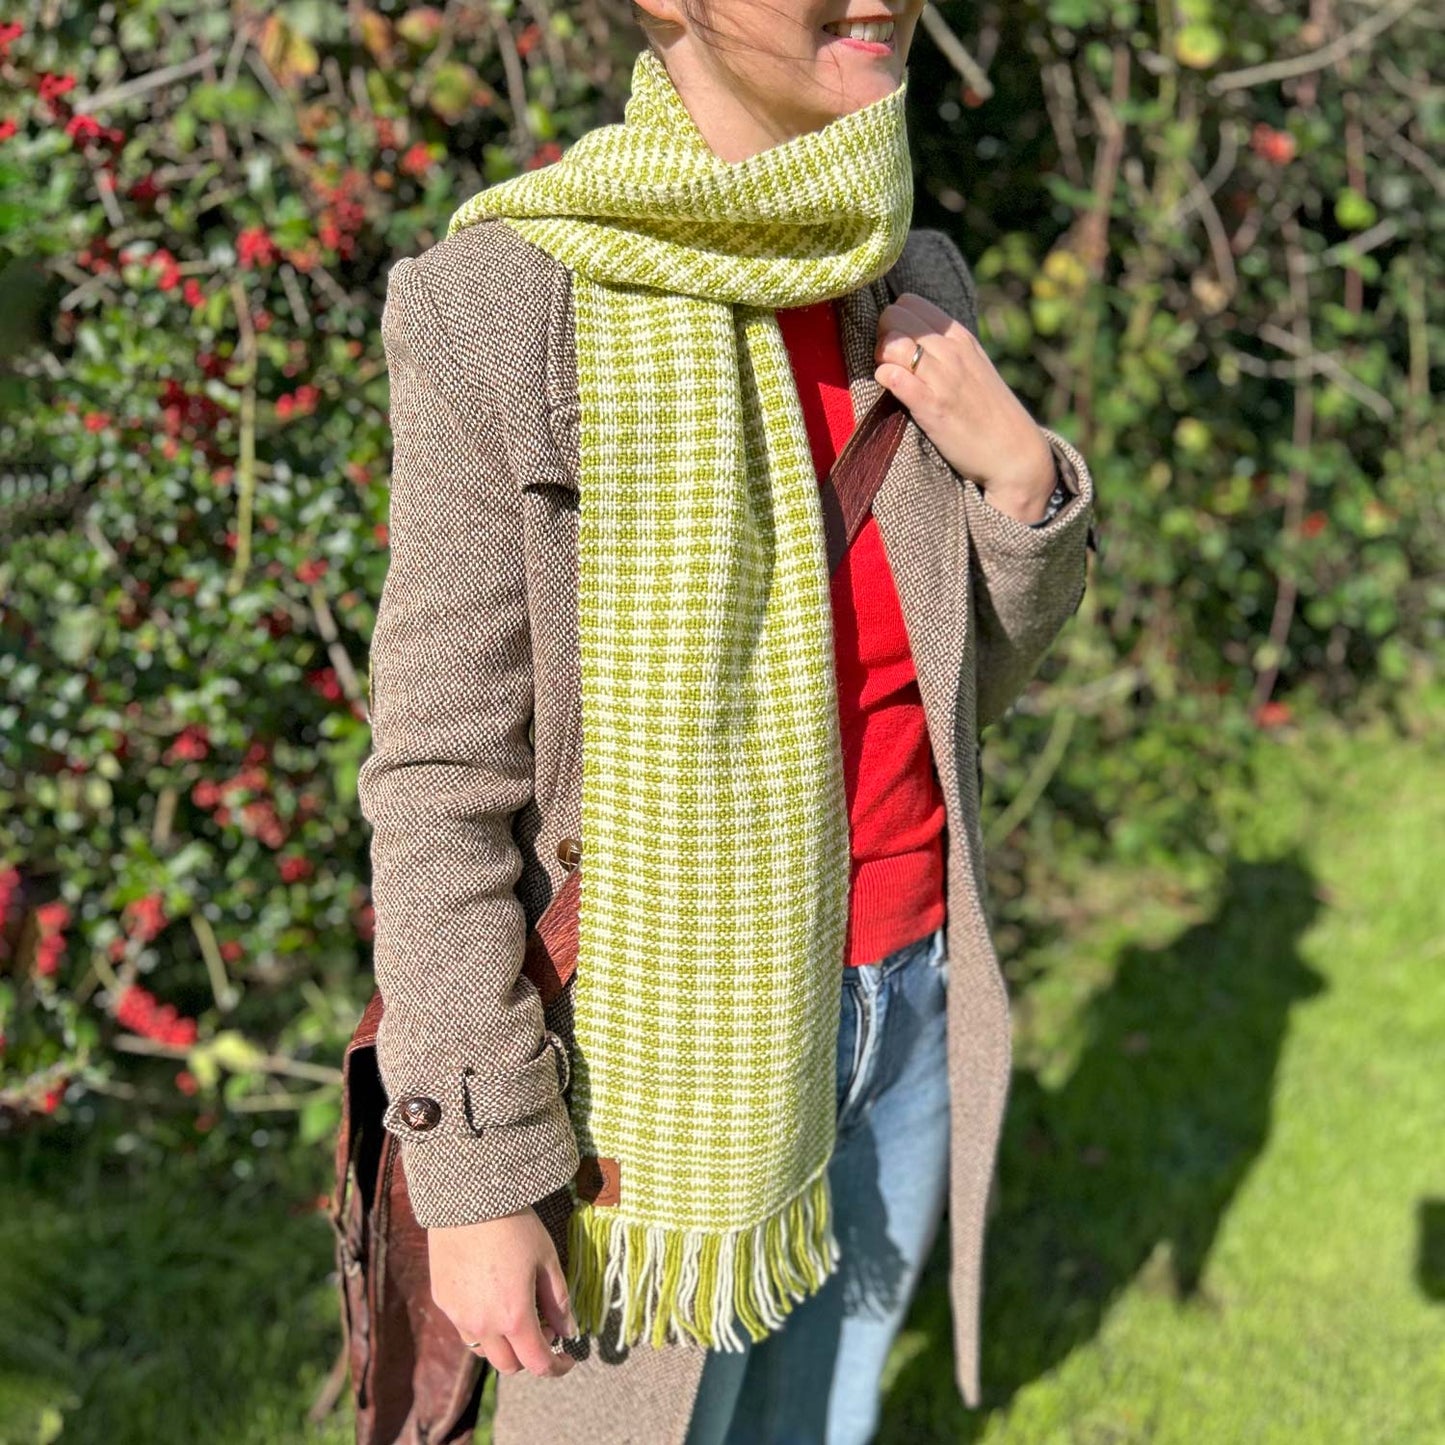 Scarf - 100% Wool - Handwoven - Welsh Checked - Green & Cream